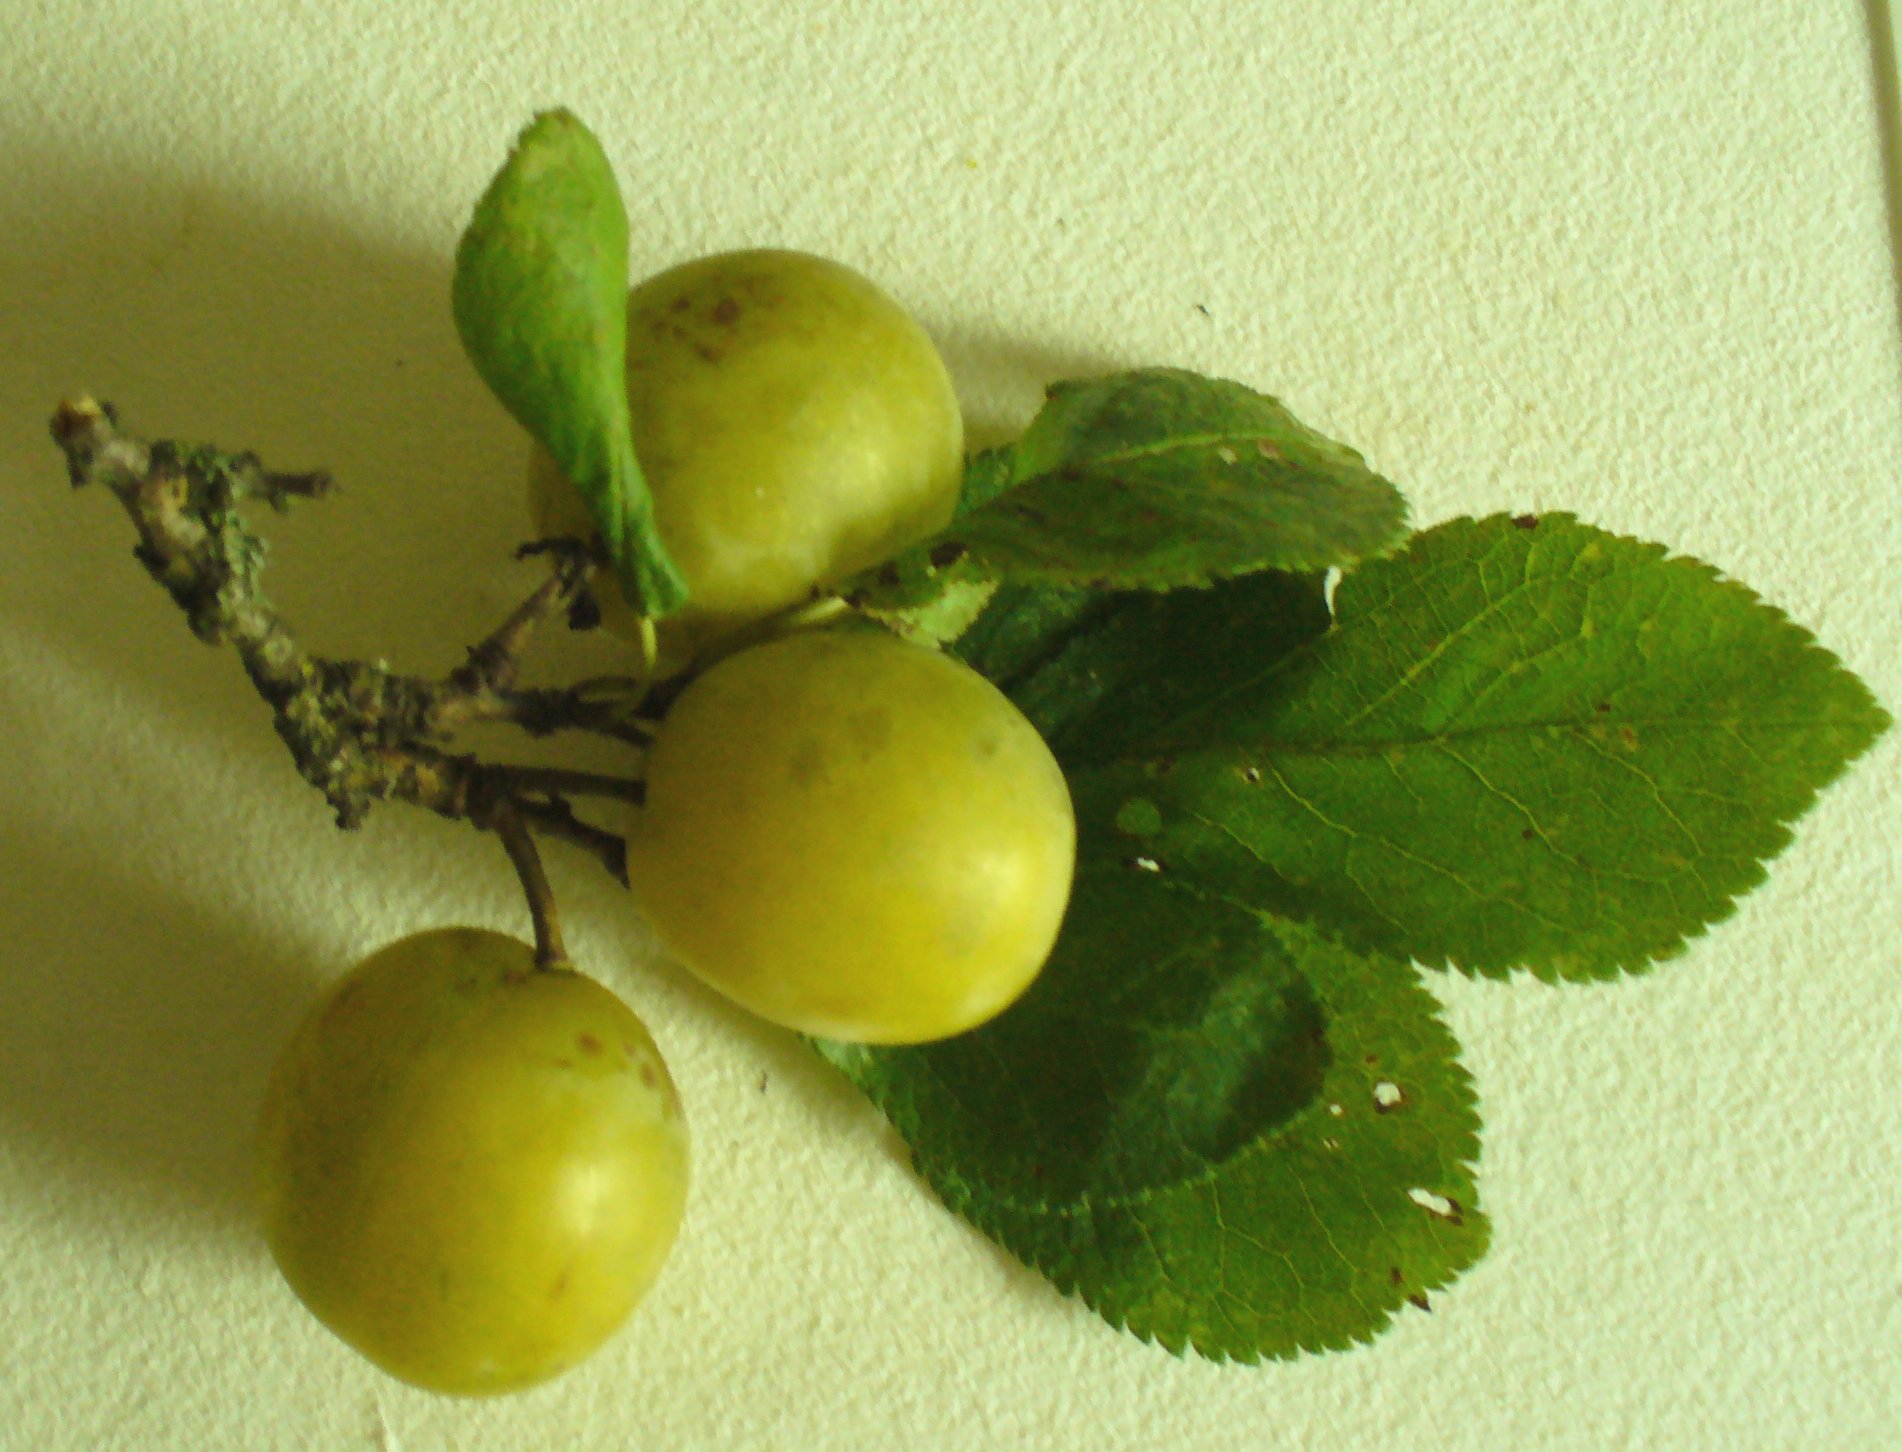 are they greengages?